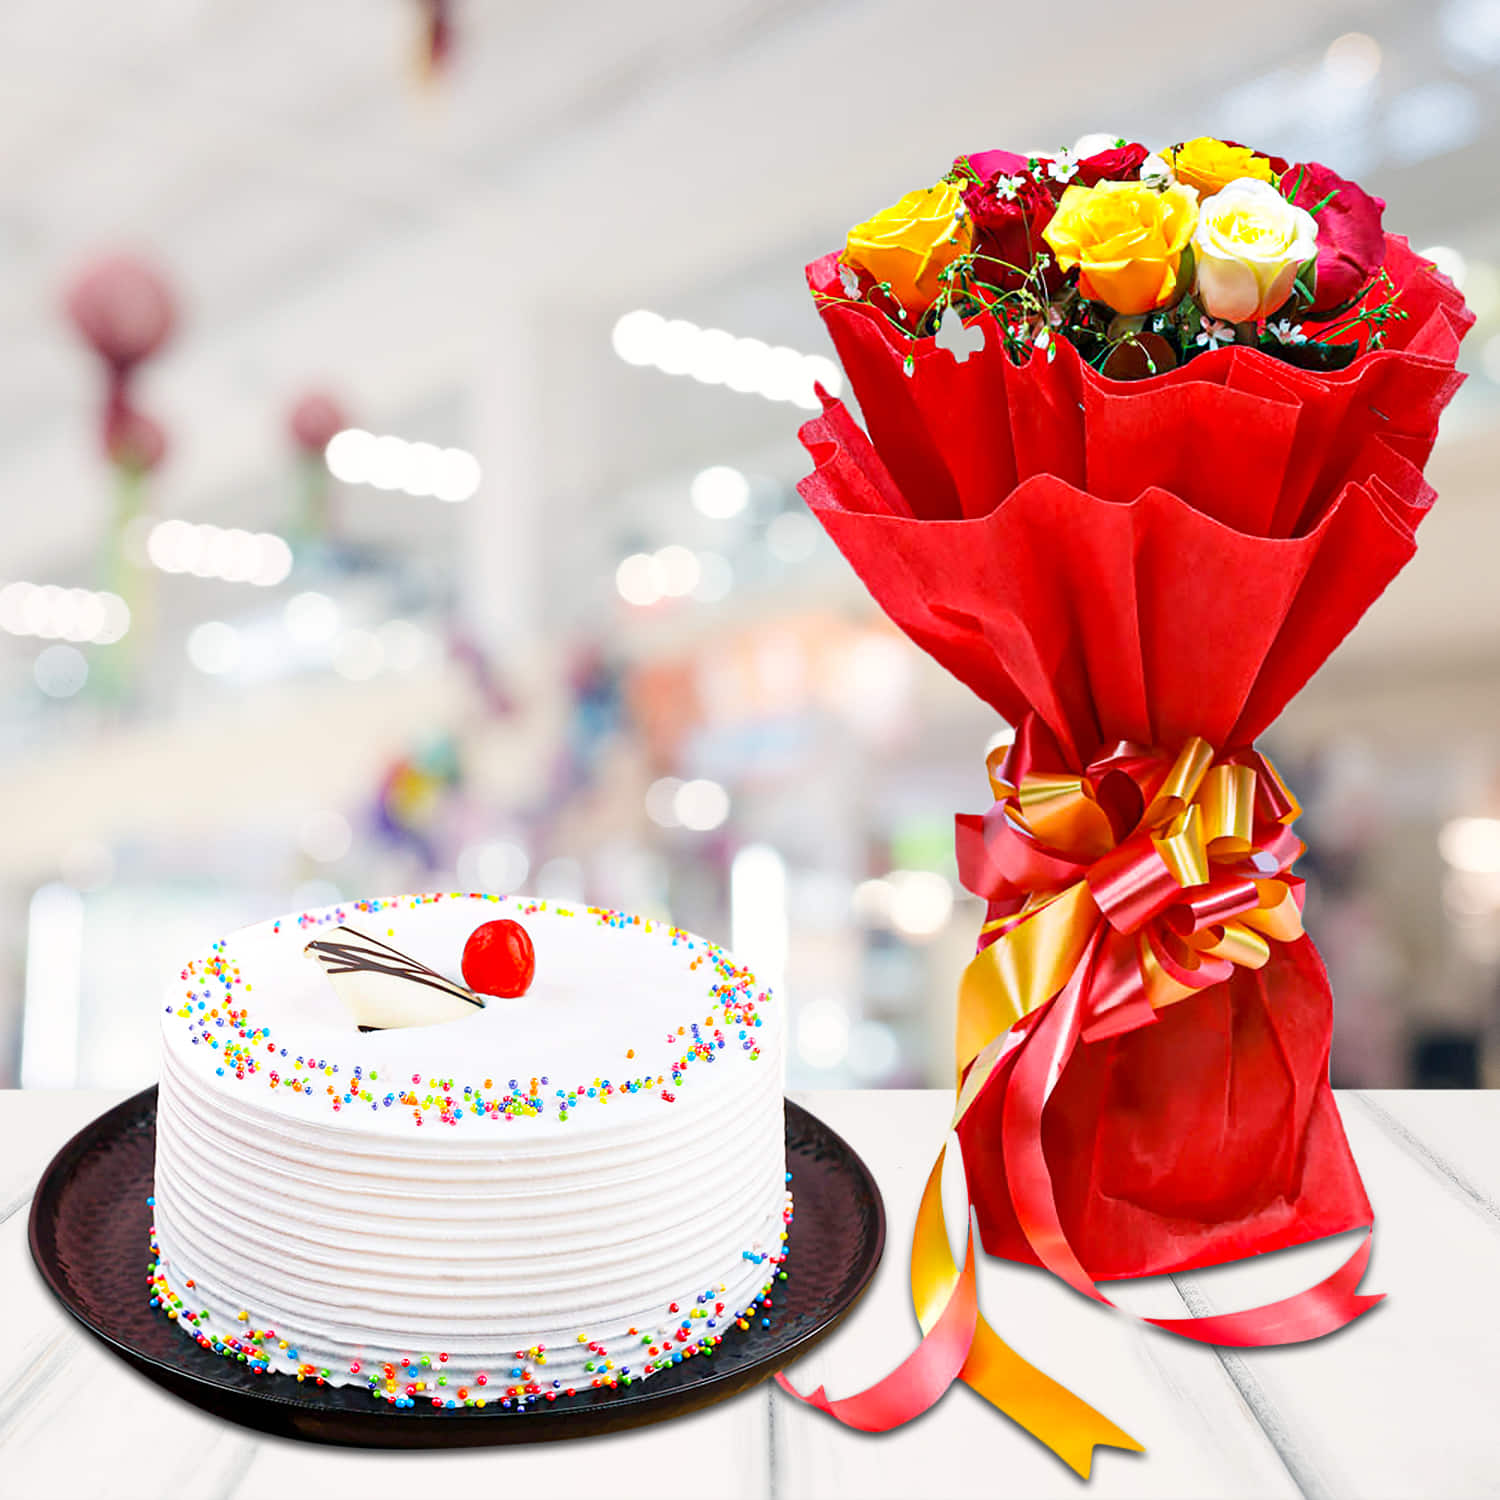 1 Flower Delivery in Lucknow | Send Same Day Flowers in लखनऊ